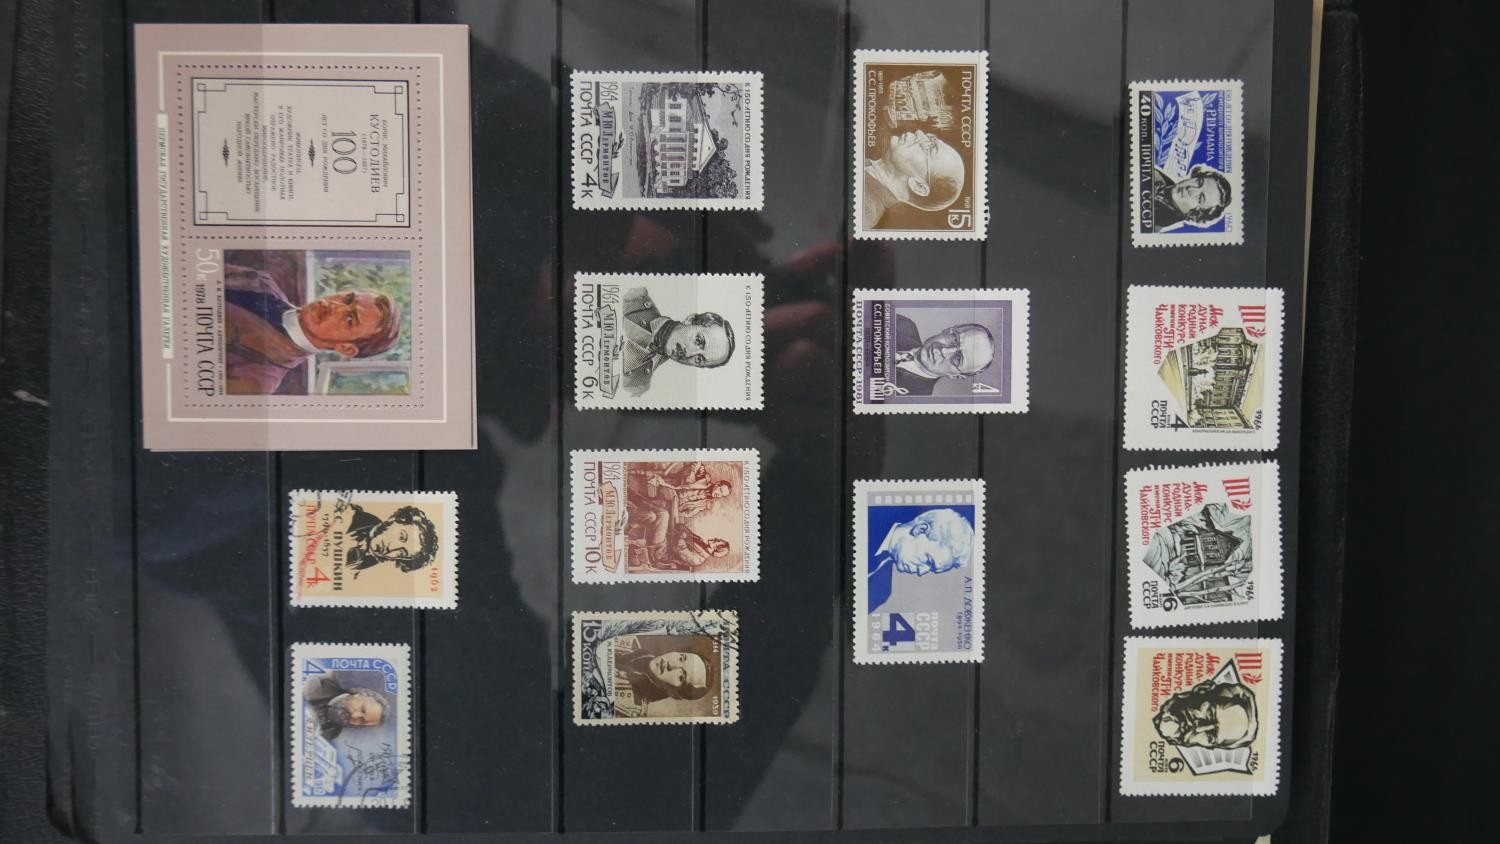 An album of world stamps along with a British Collecta coin album filled with various British coins. - Image 4 of 15